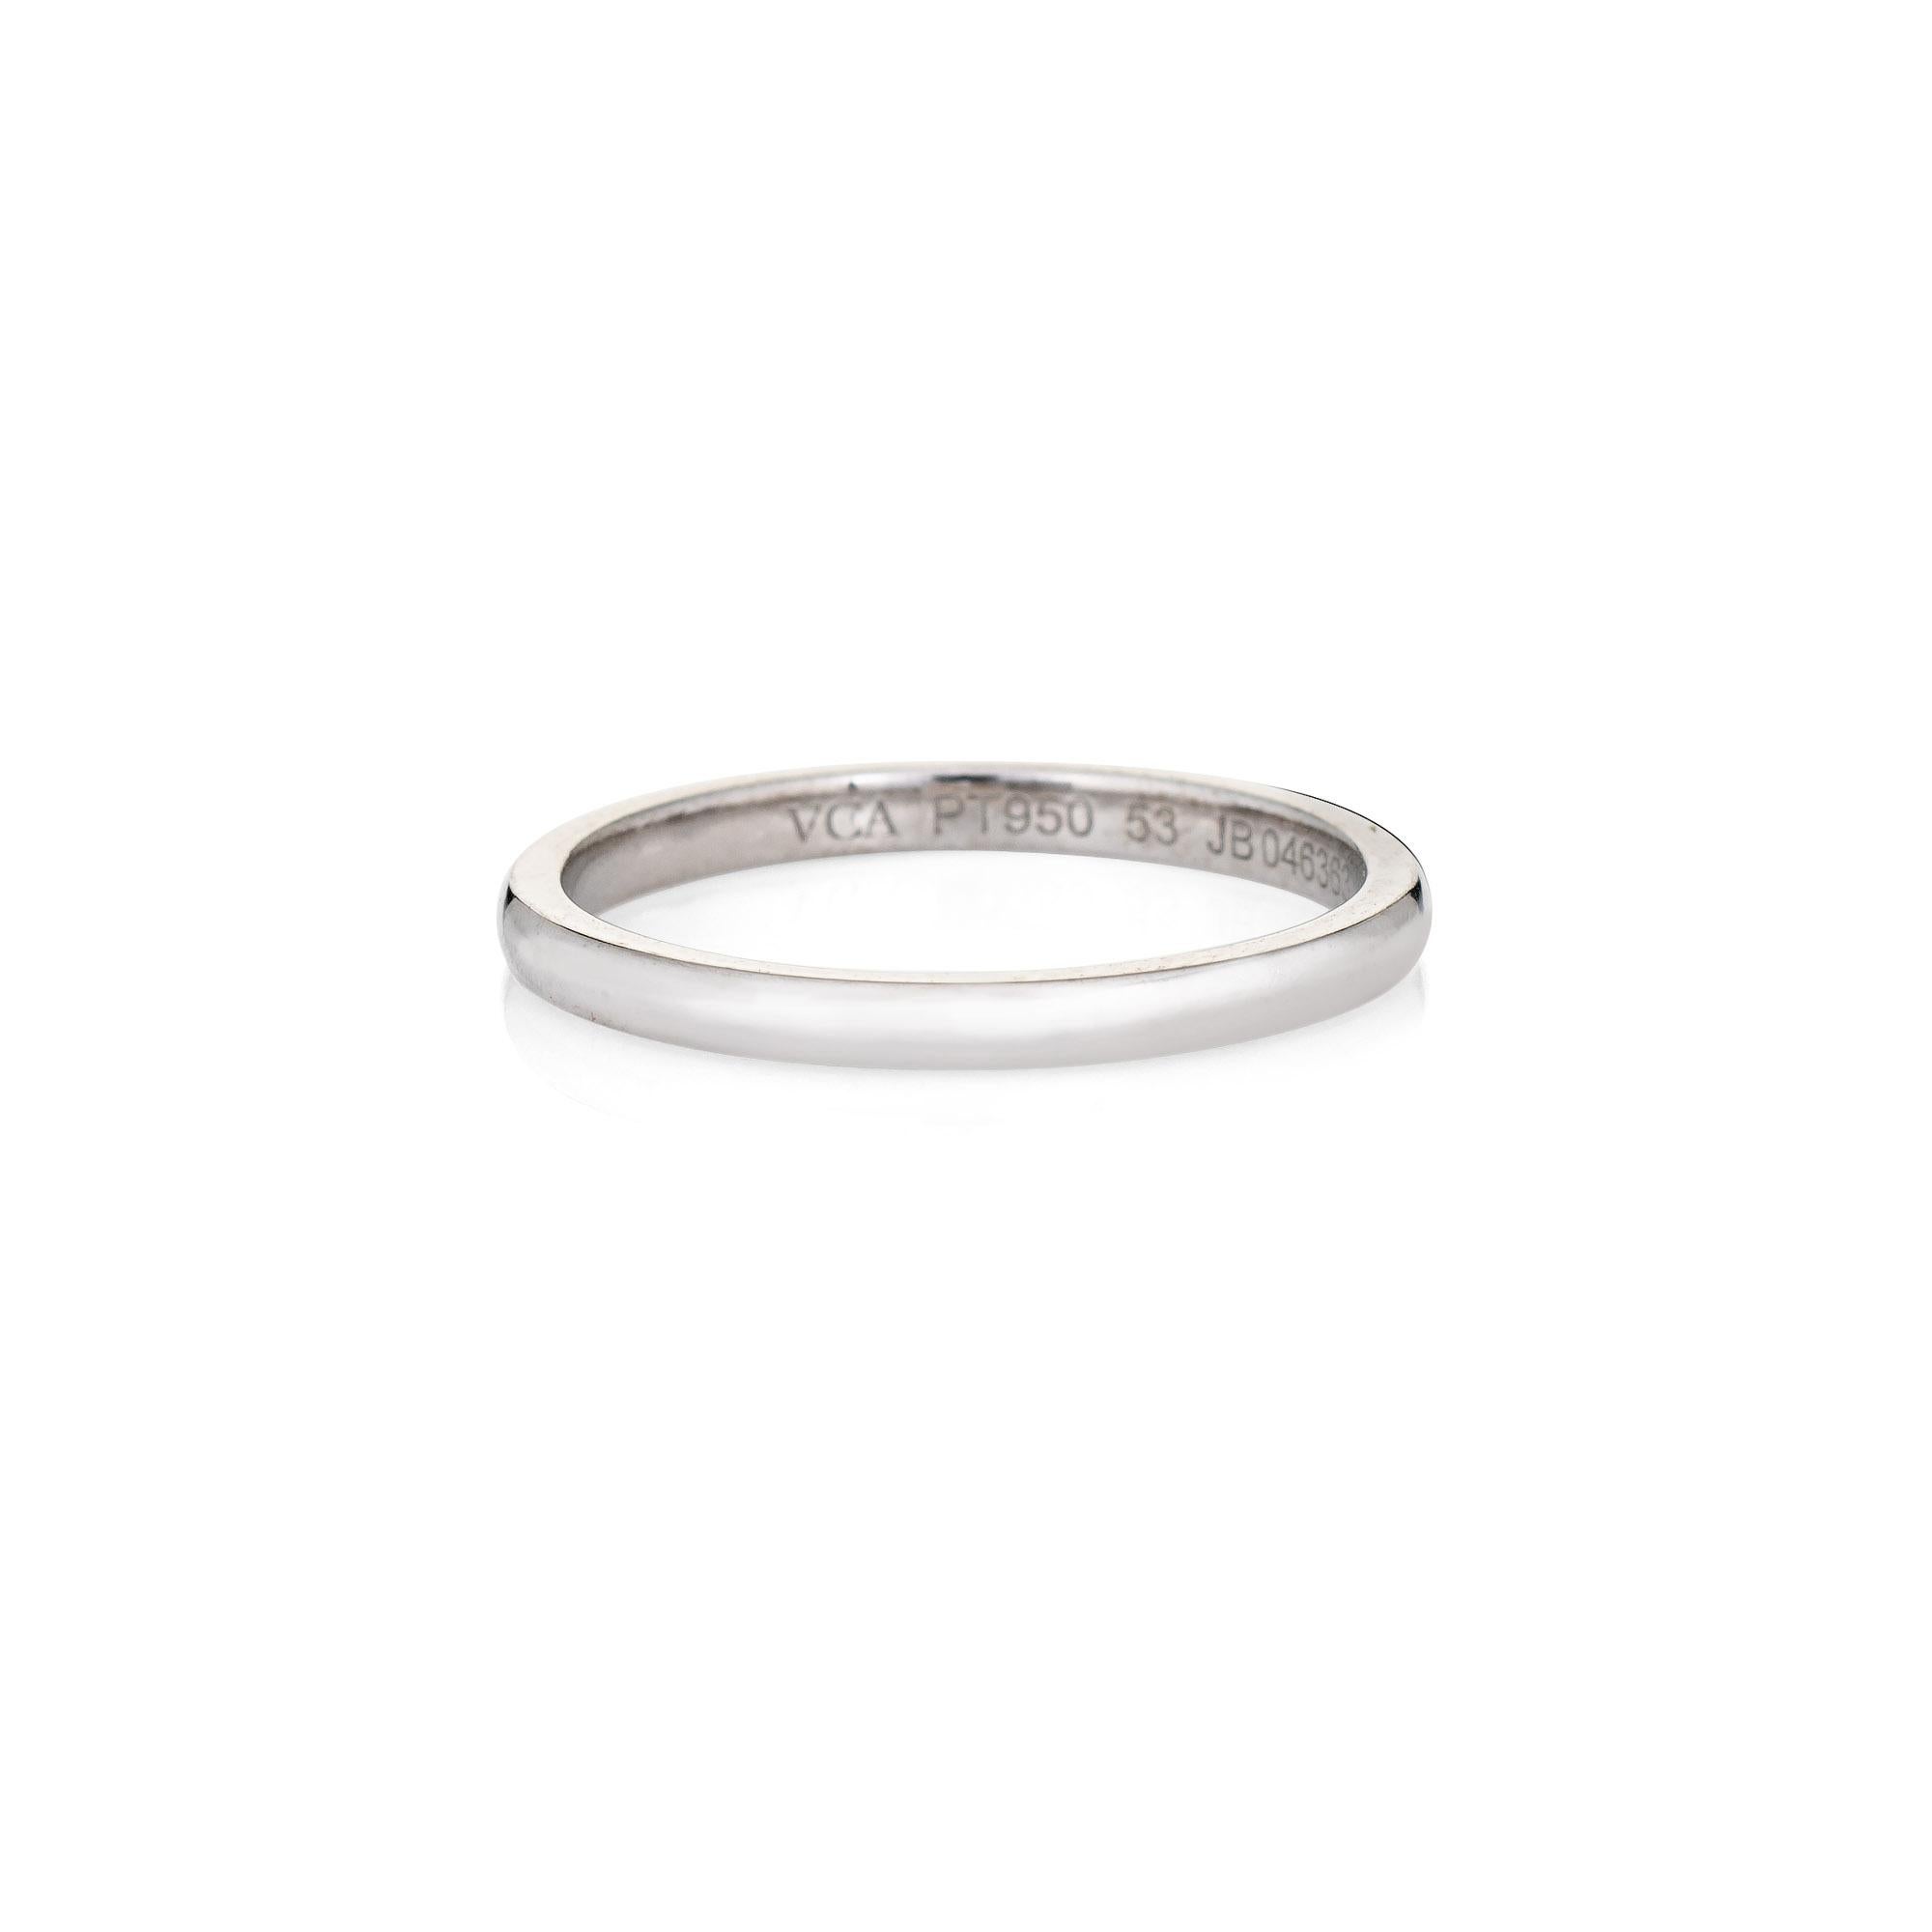 Pre-owned Van Cleef & Arpels 'Estelle' ring crafted in 950 platinum (circa 2000s).  

The Tendrement ring is a simple and classic design with a polished metal. The ring is great worn alone or layered with your fine jewelry from any era.

The ring is